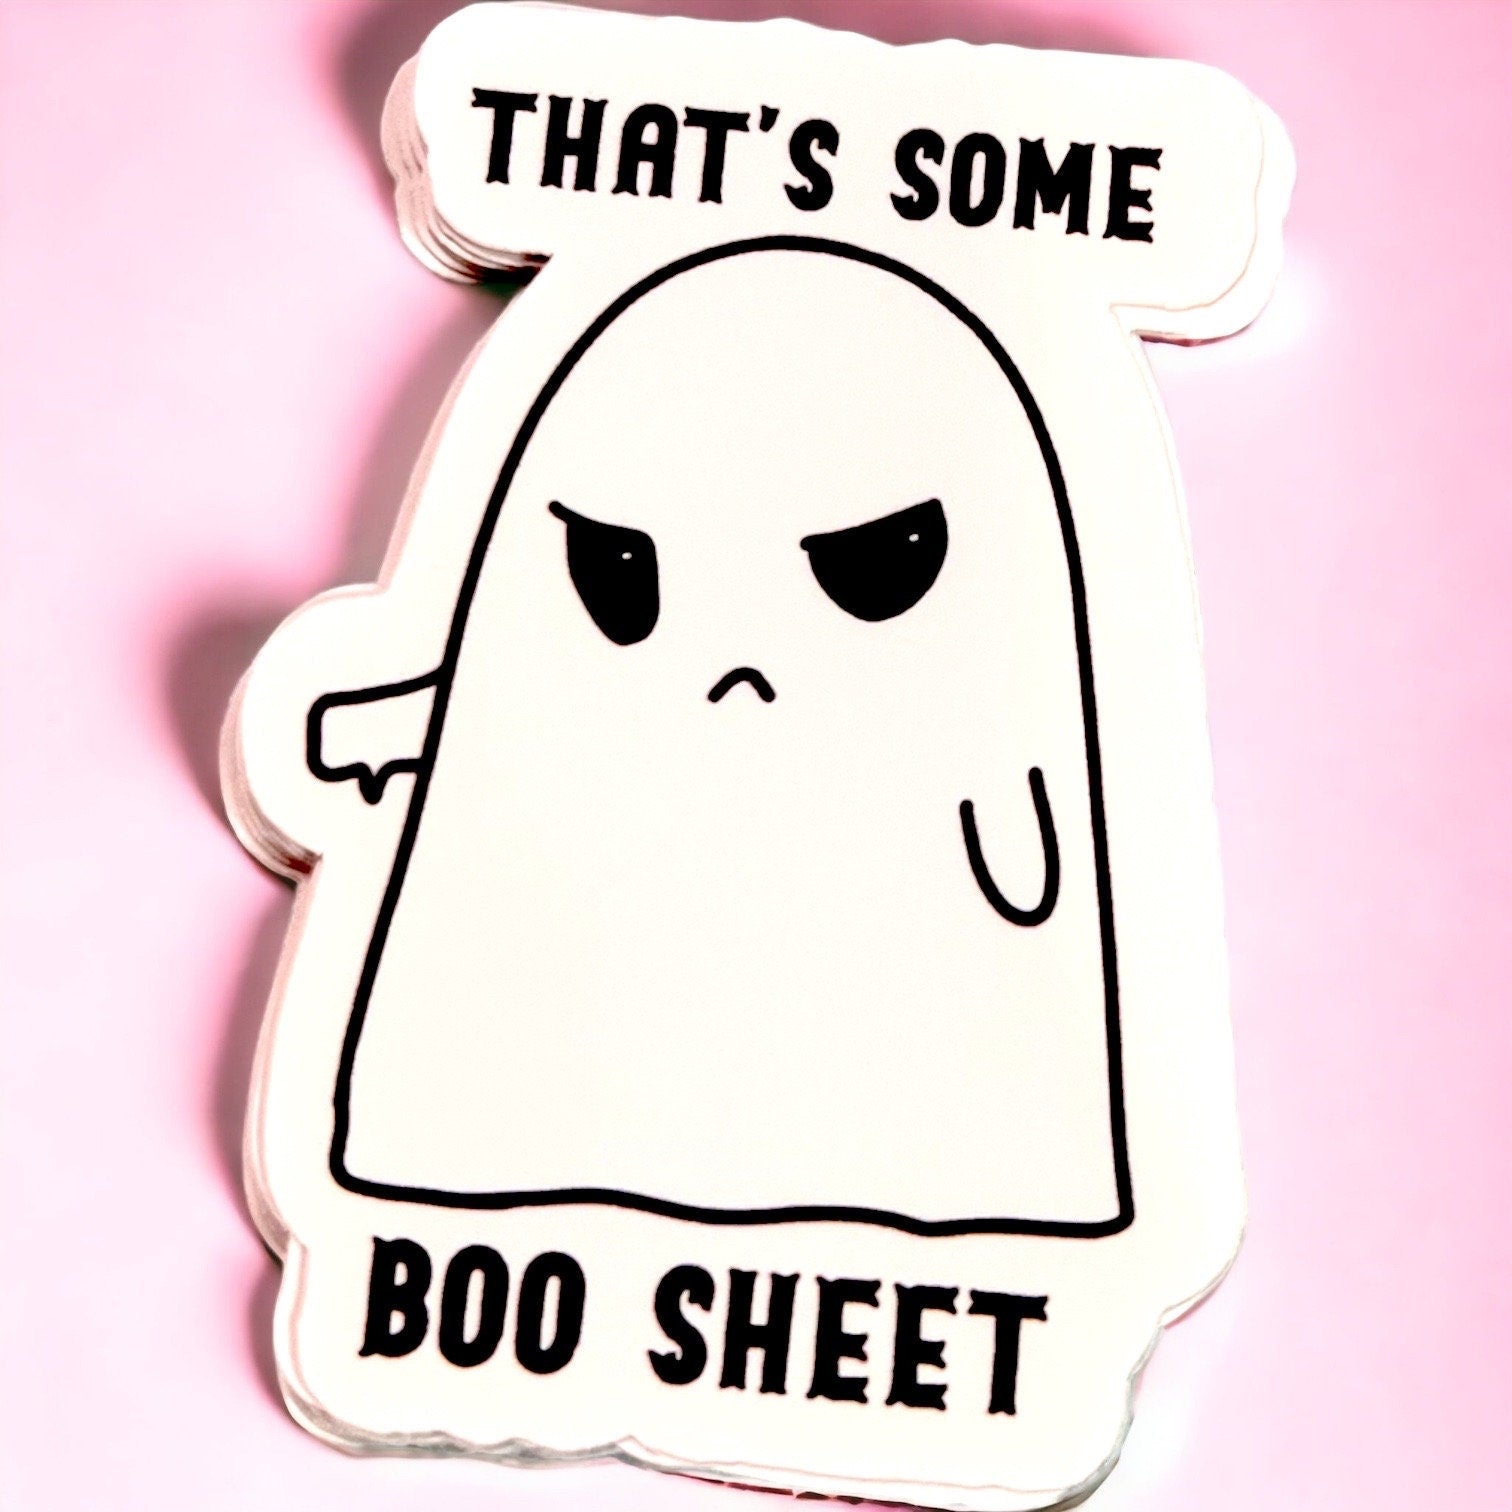 Funny Ghost sticker, Halloween stickers, spooky stickers, kindle stickers, that's some boo sheet, funny quotes, cute ghost, laptop, phone